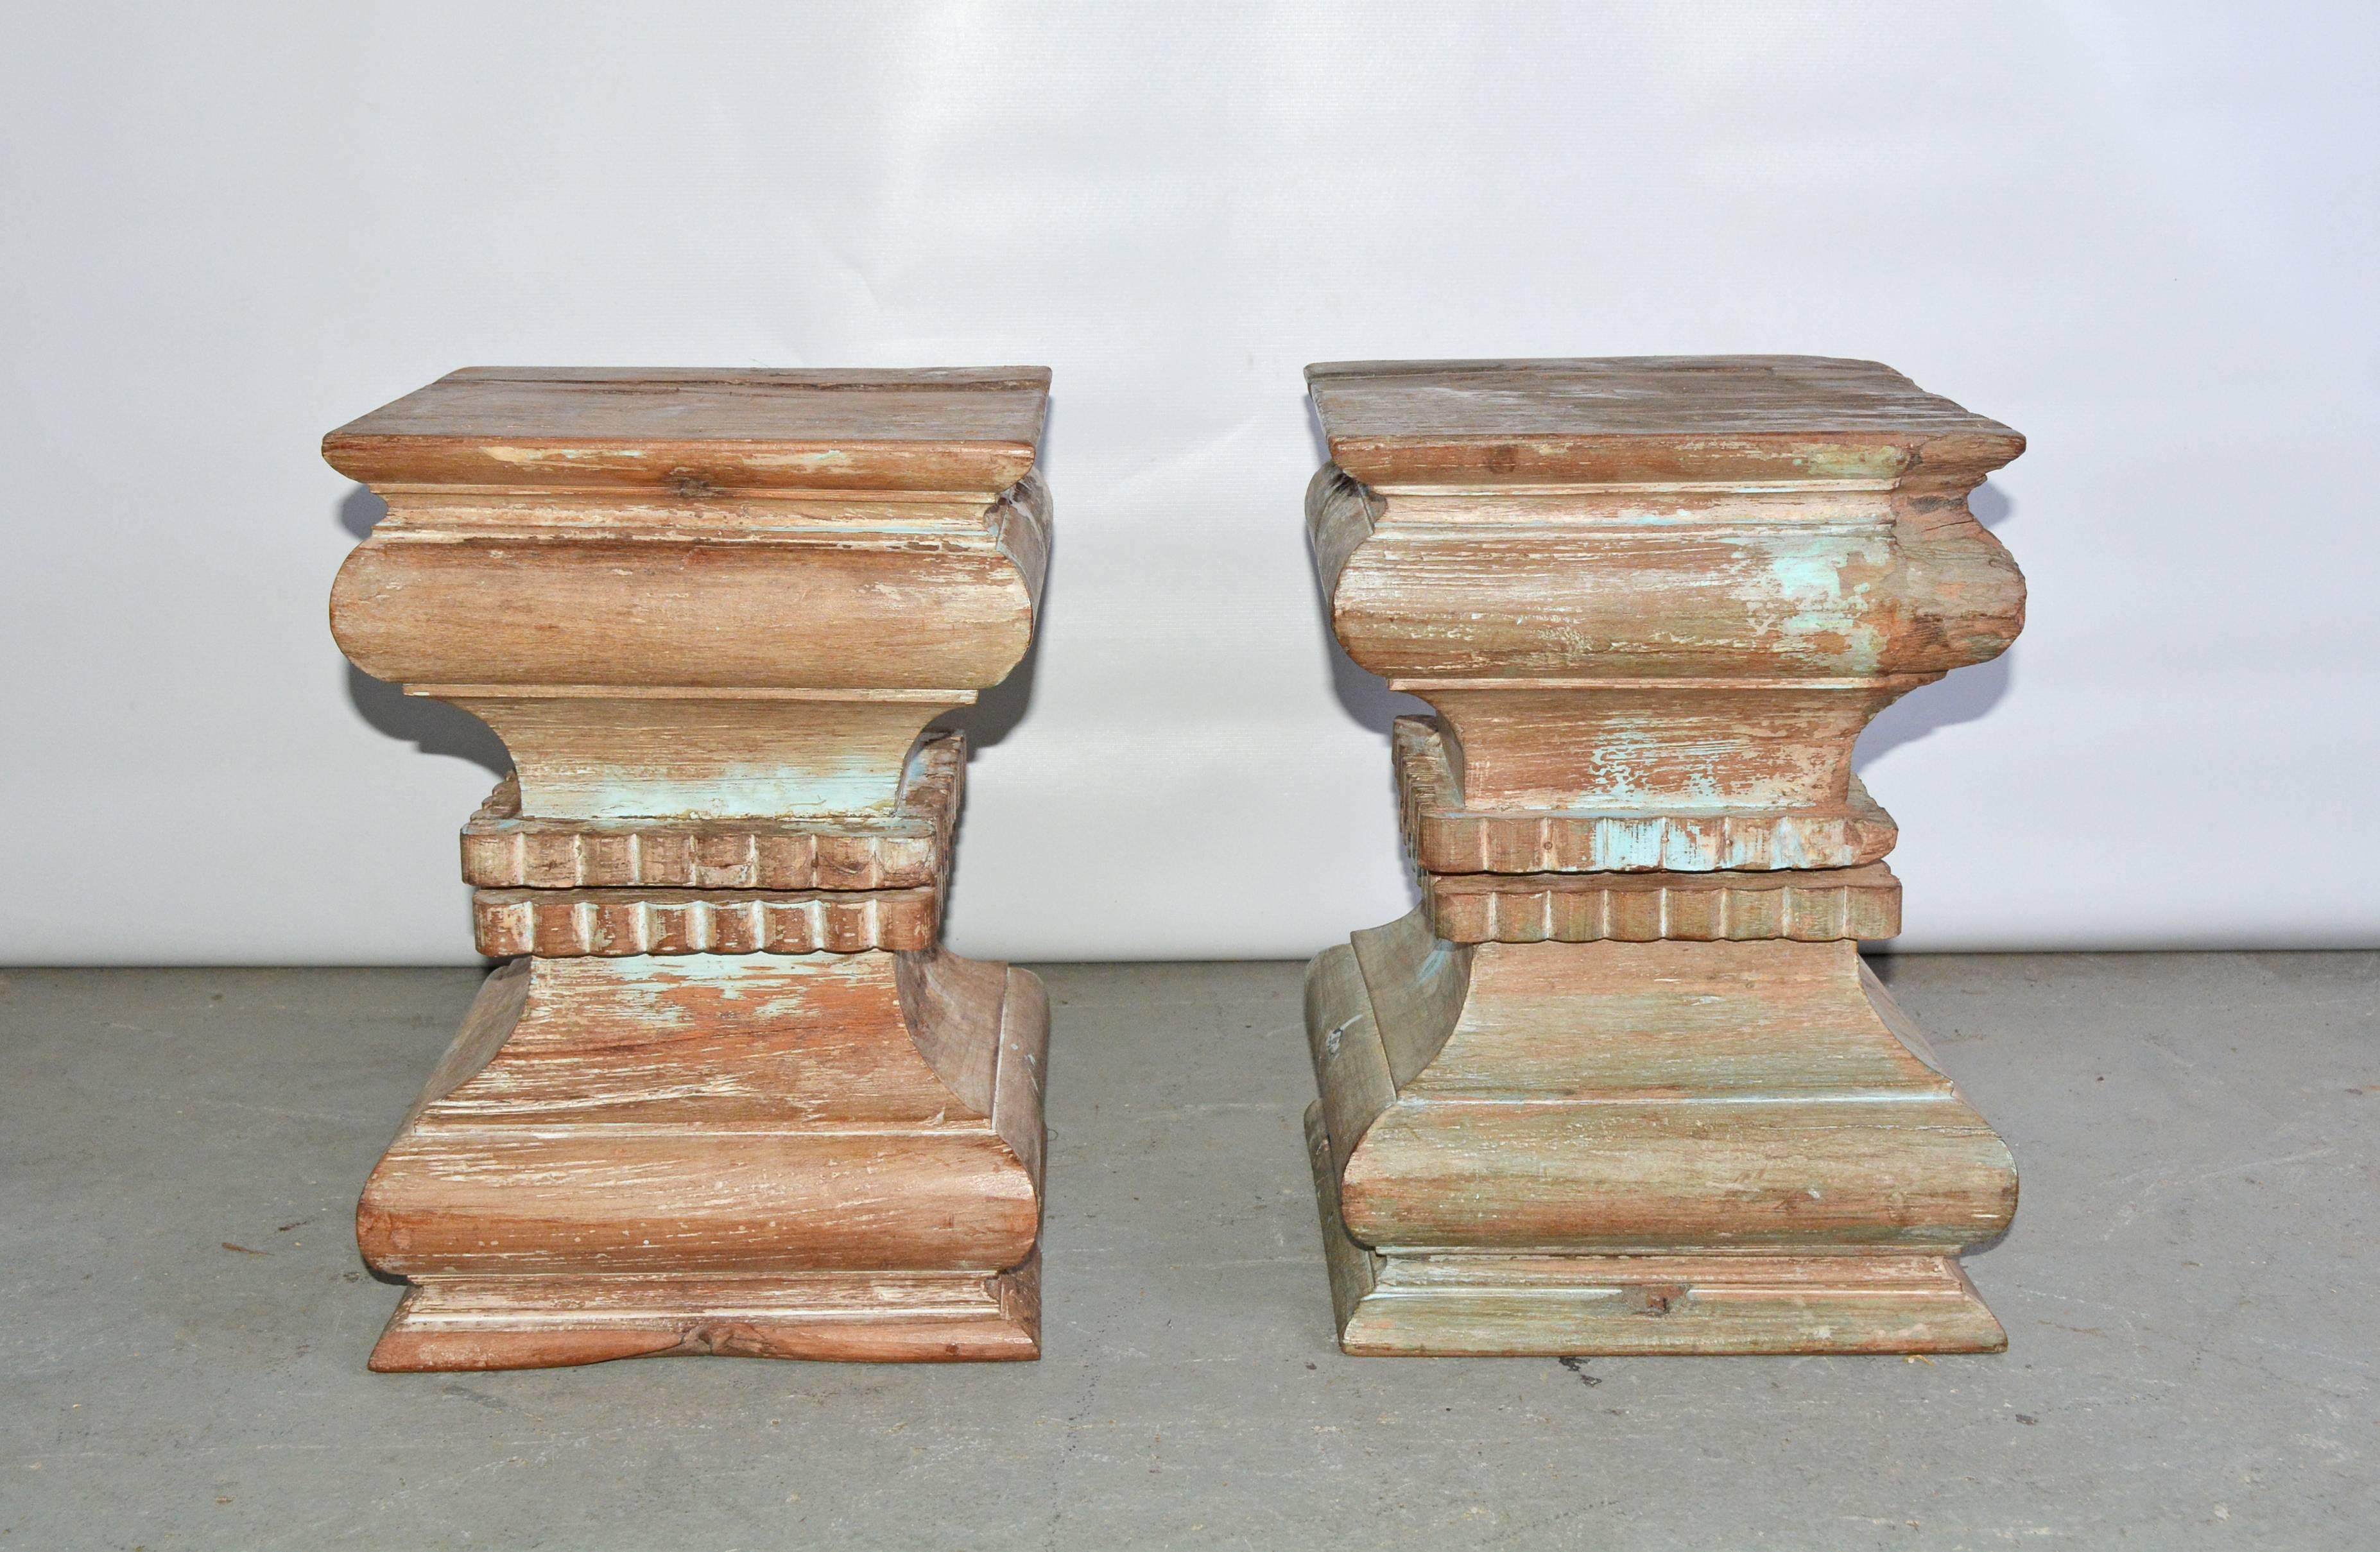 Two very special and very similar Indian carved wood plinth table bases or stools. Beautifully hand-carved with wonderful wood patina showing remanent of turquoise color paint. Once part of a column. reduced to a size usable as end tables,